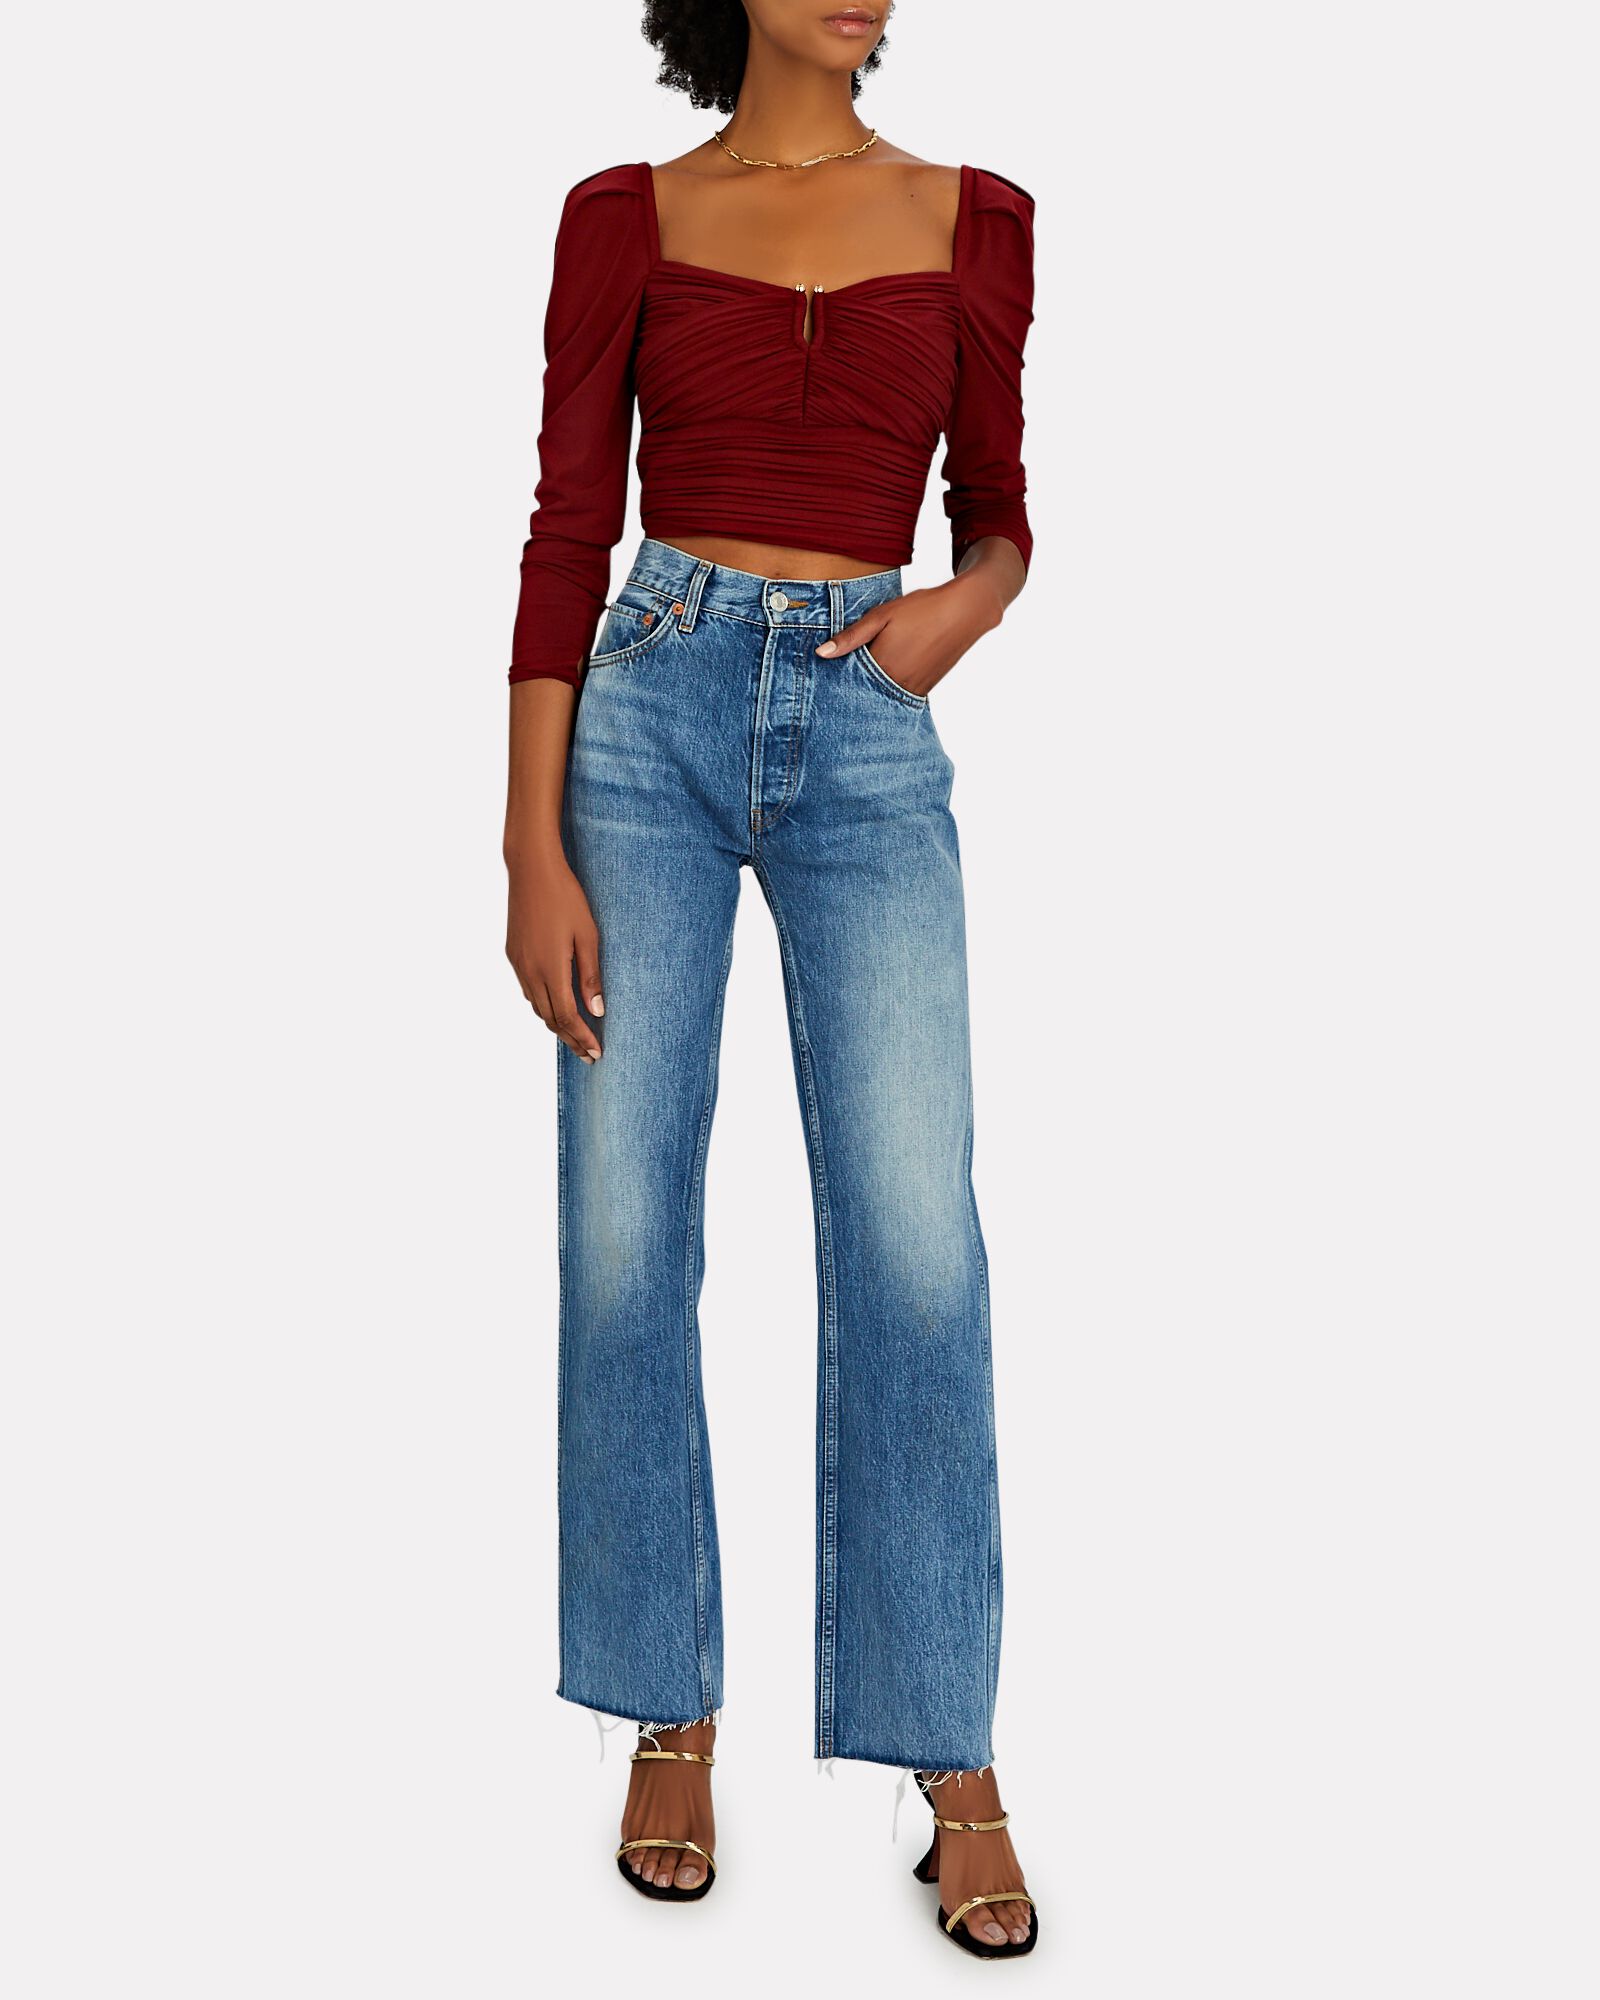 Intermix: Extra 40% Off Designer Sale – Early Access